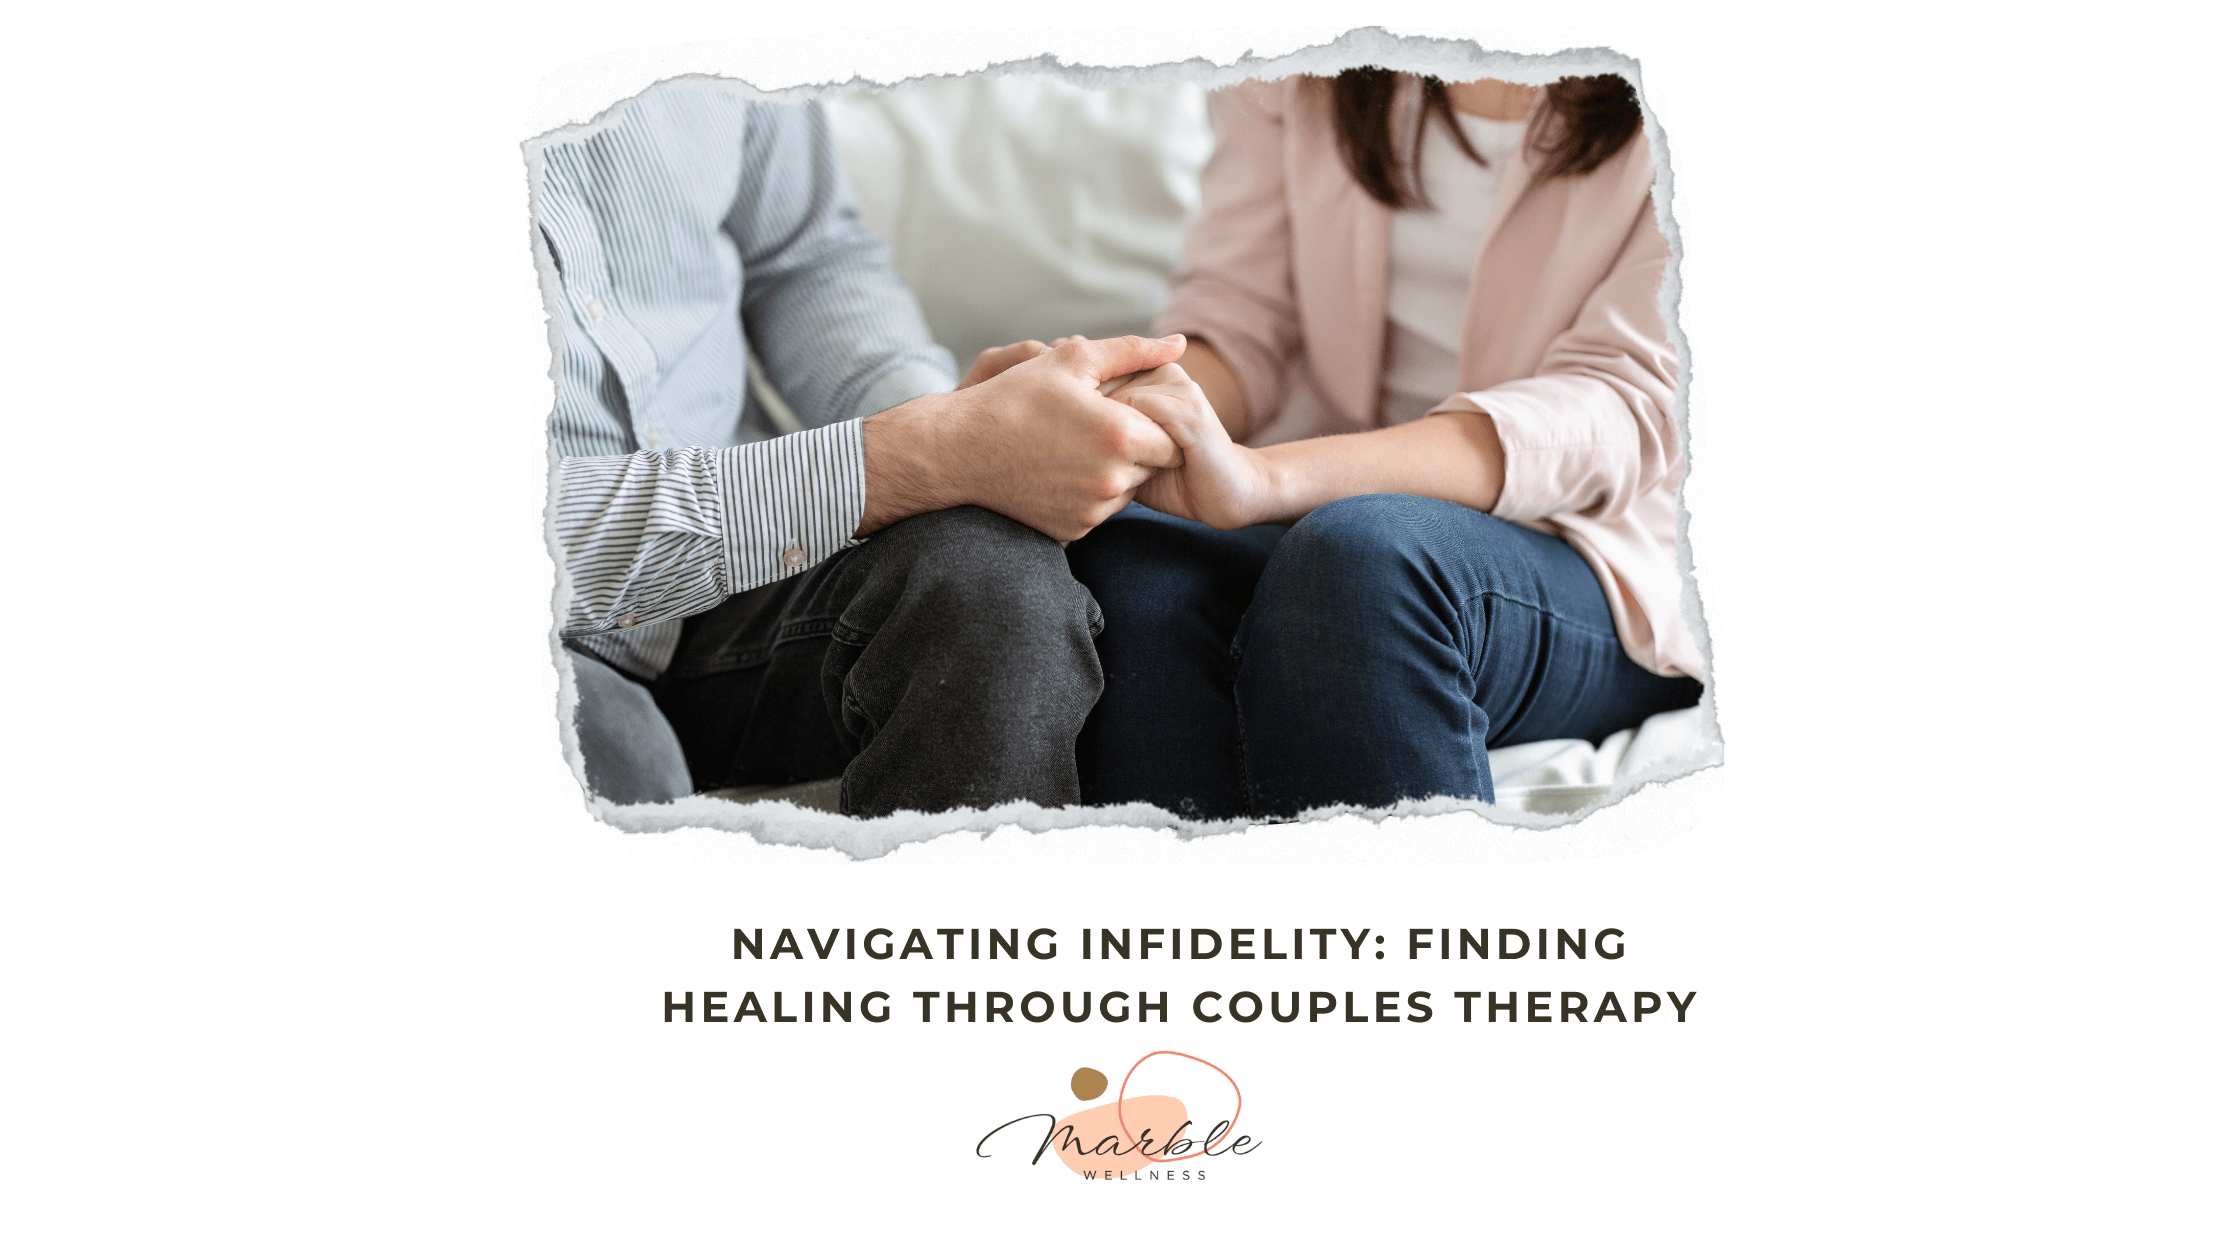 Photo of a couple holding hands and seeking reconciliation in couples therapy in St. Louis. This represents how navigating infidelity can be easier with the support of a skilled couples therapist.